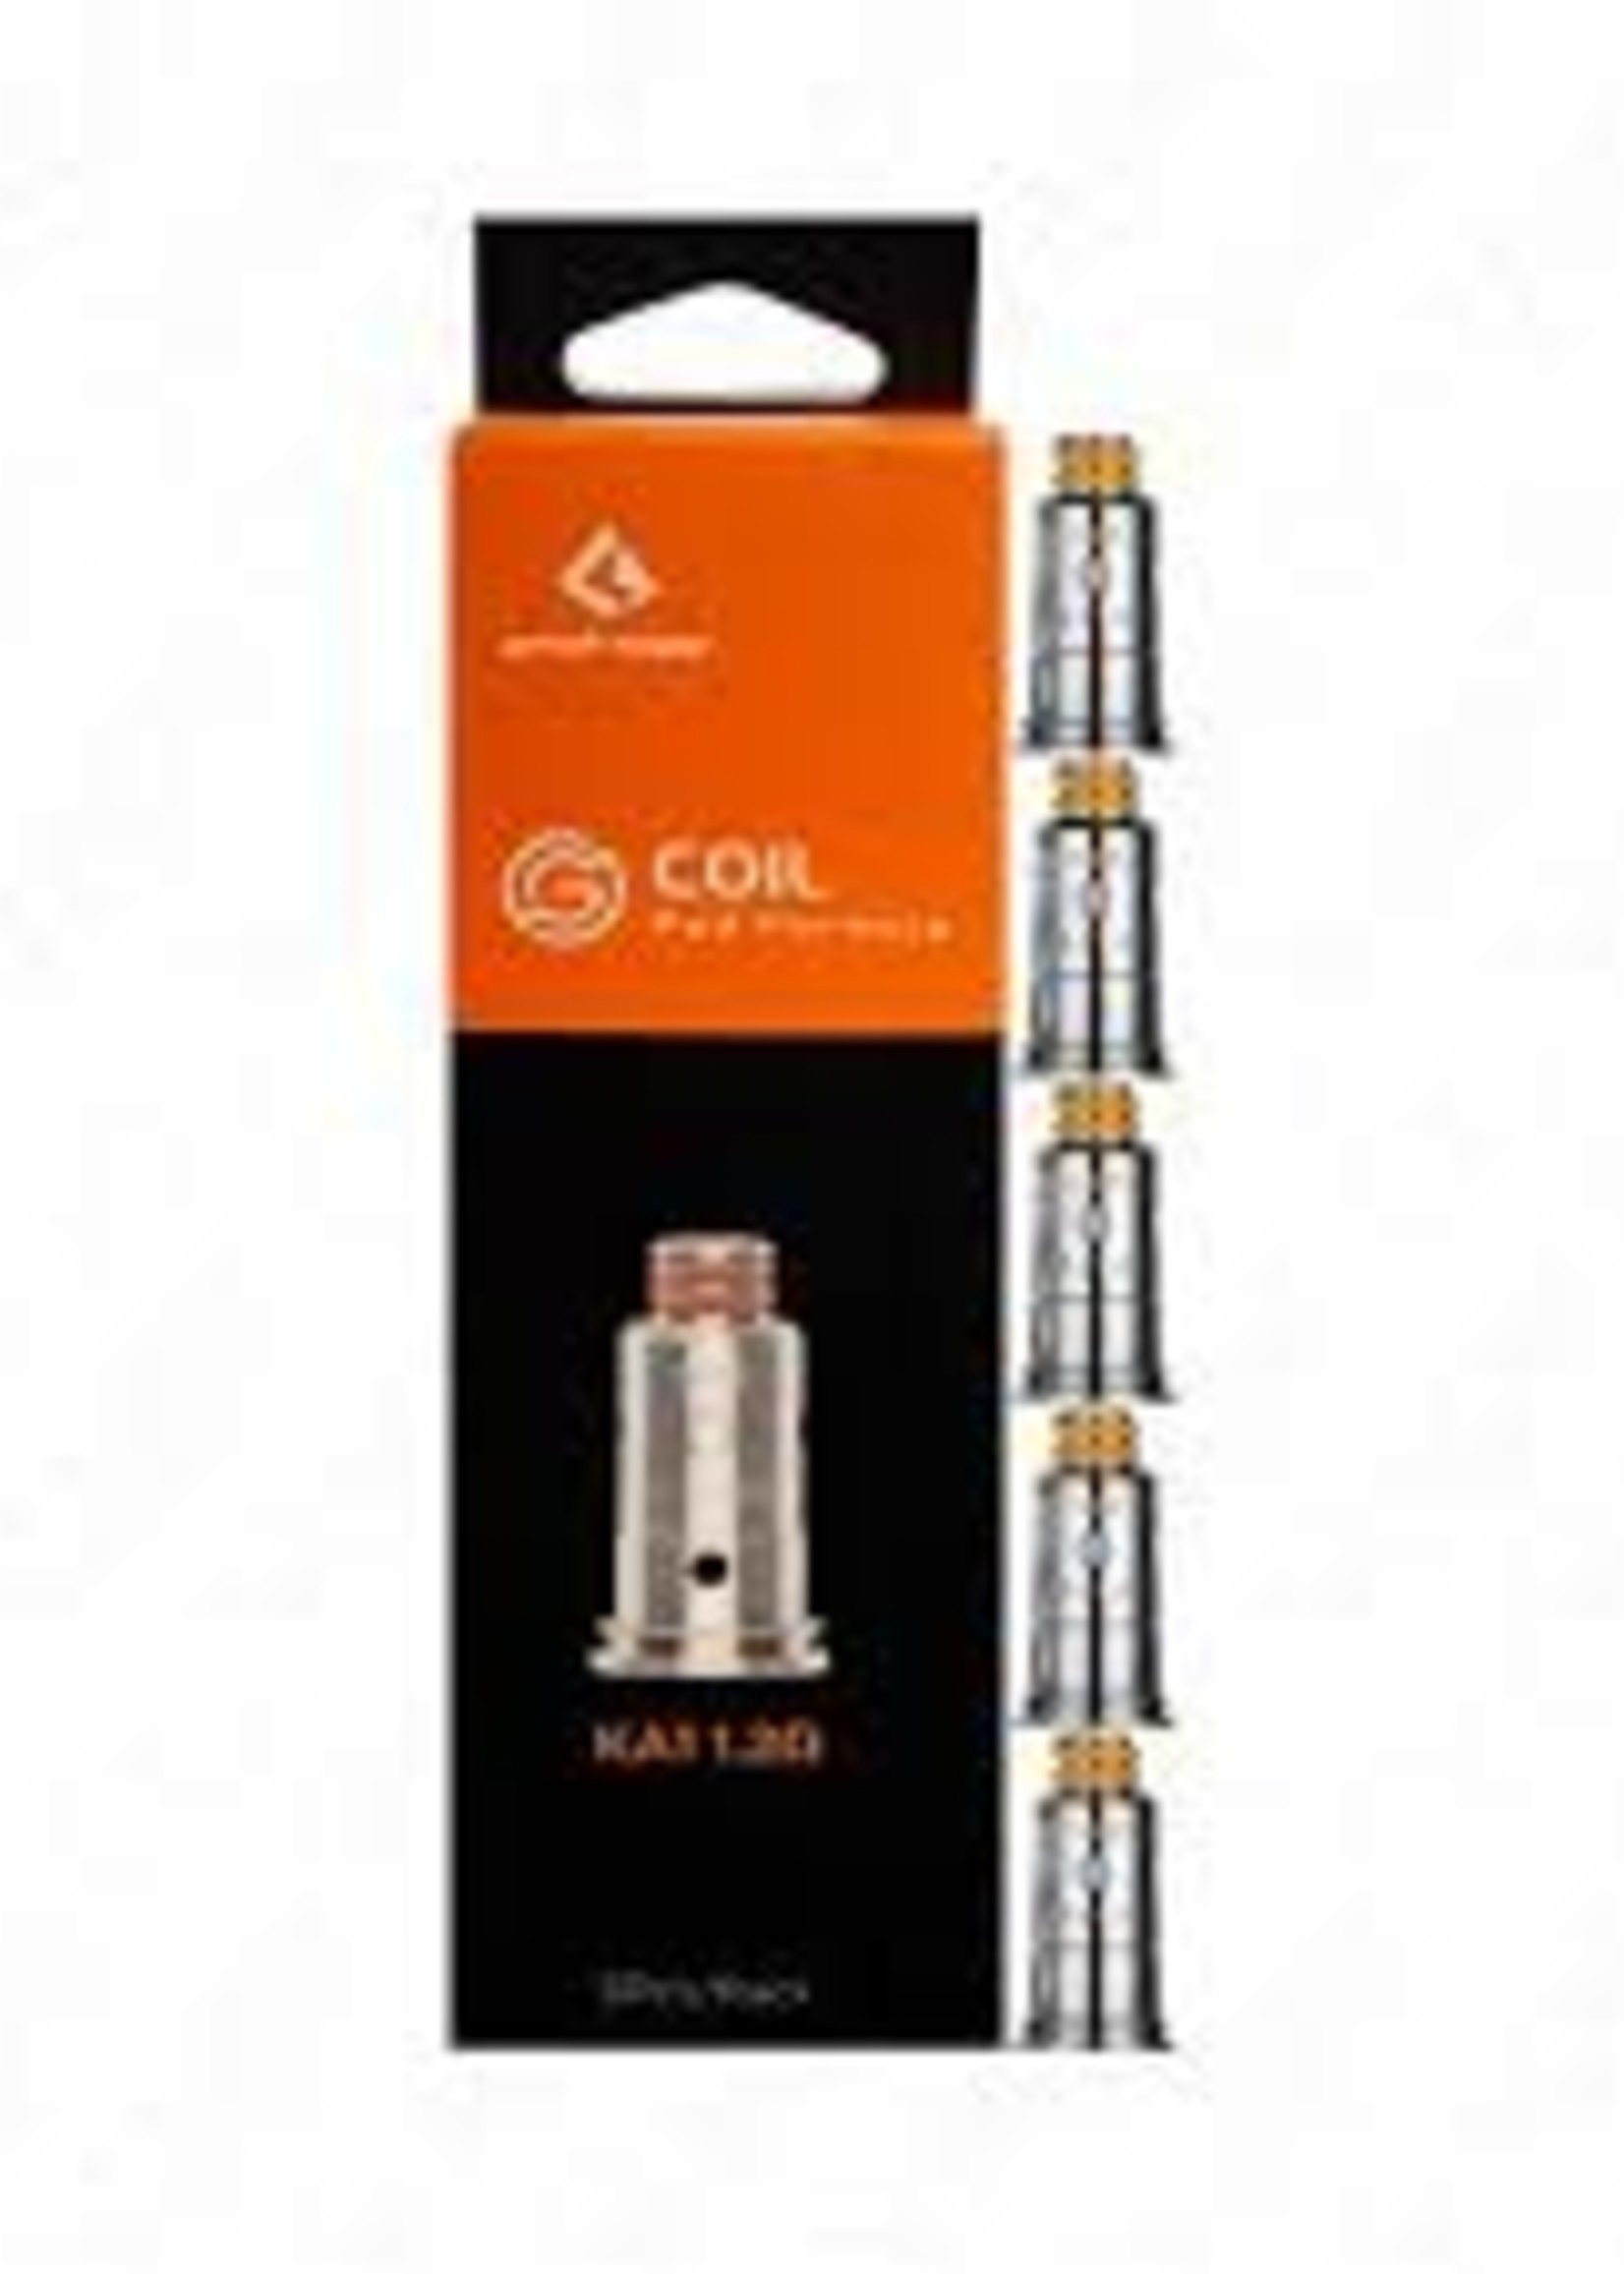 GeekVape G Coils Replacement Coil - Pack of 5 - 0.6ohm